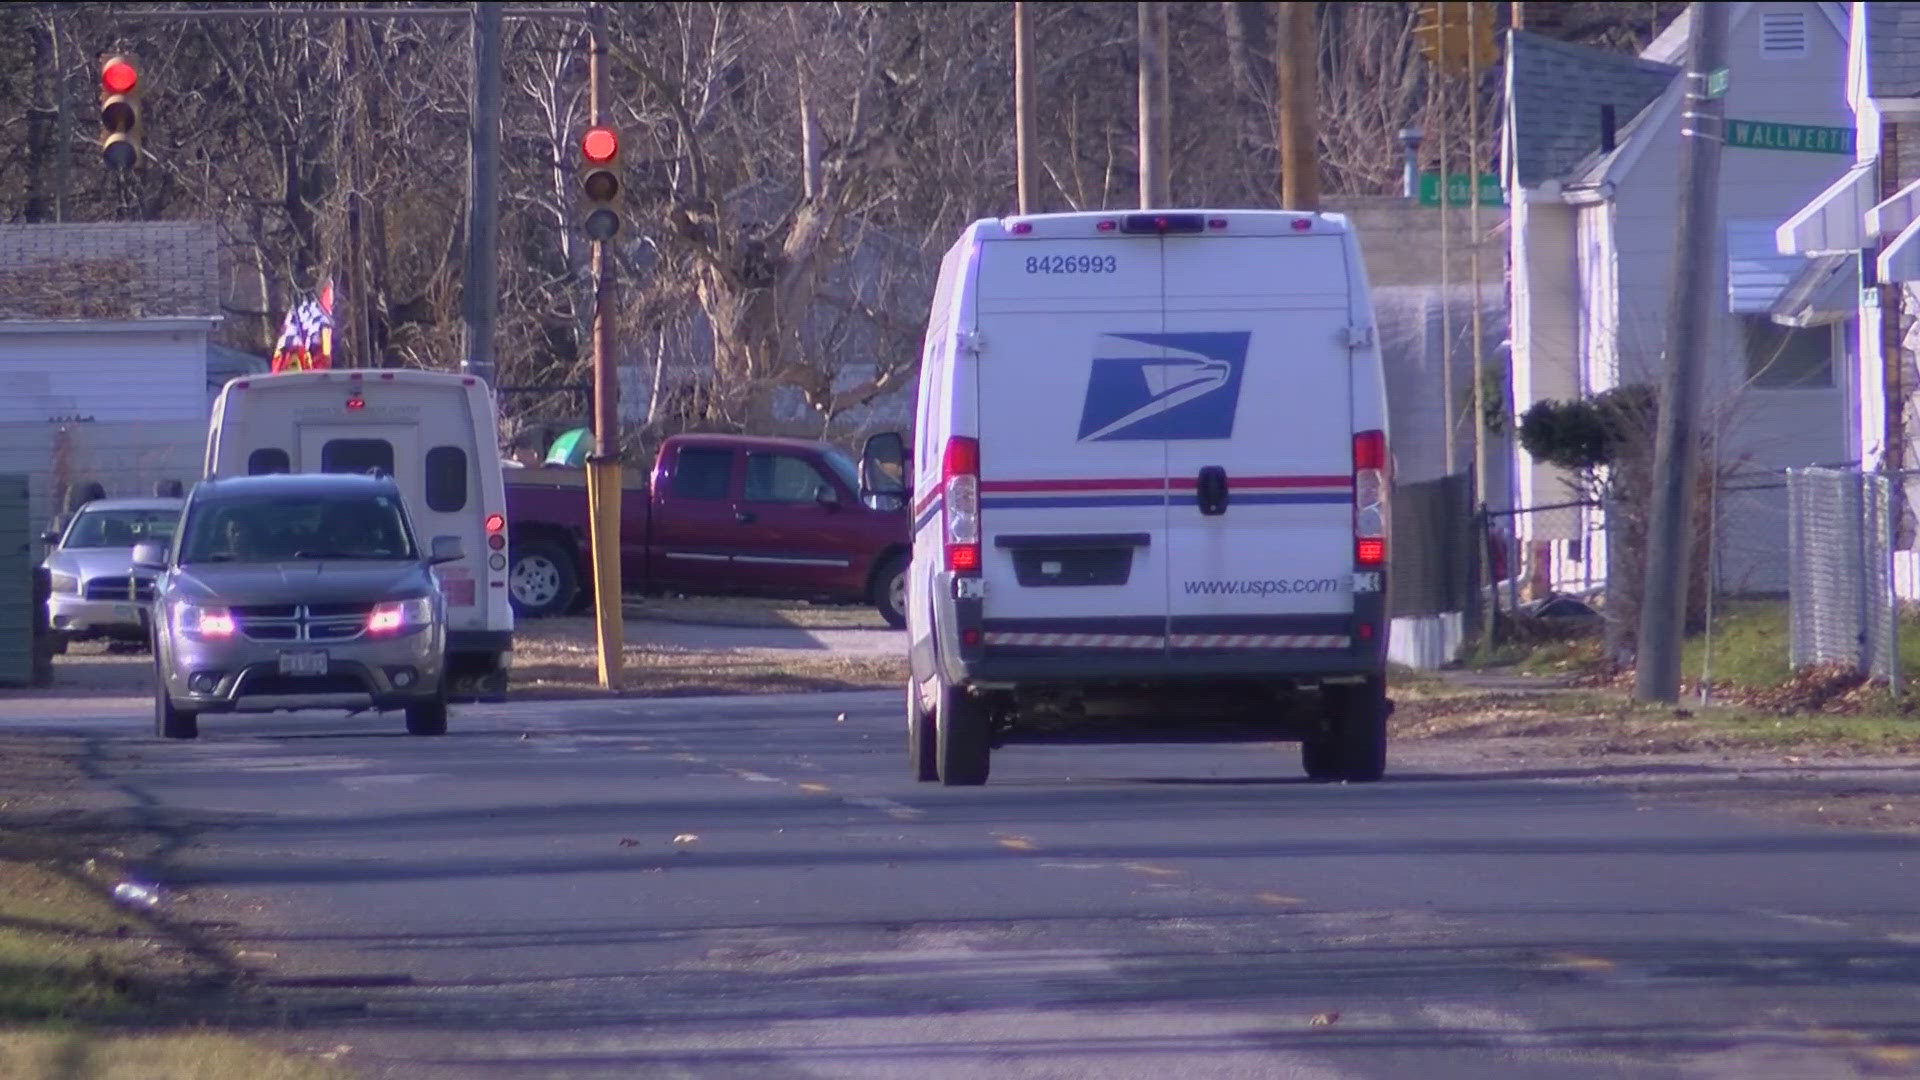 The United States Postal Service paused mail delivery to Almeda Drive in west Toledo after workers said an unrestrained dog made delivery dangerous.